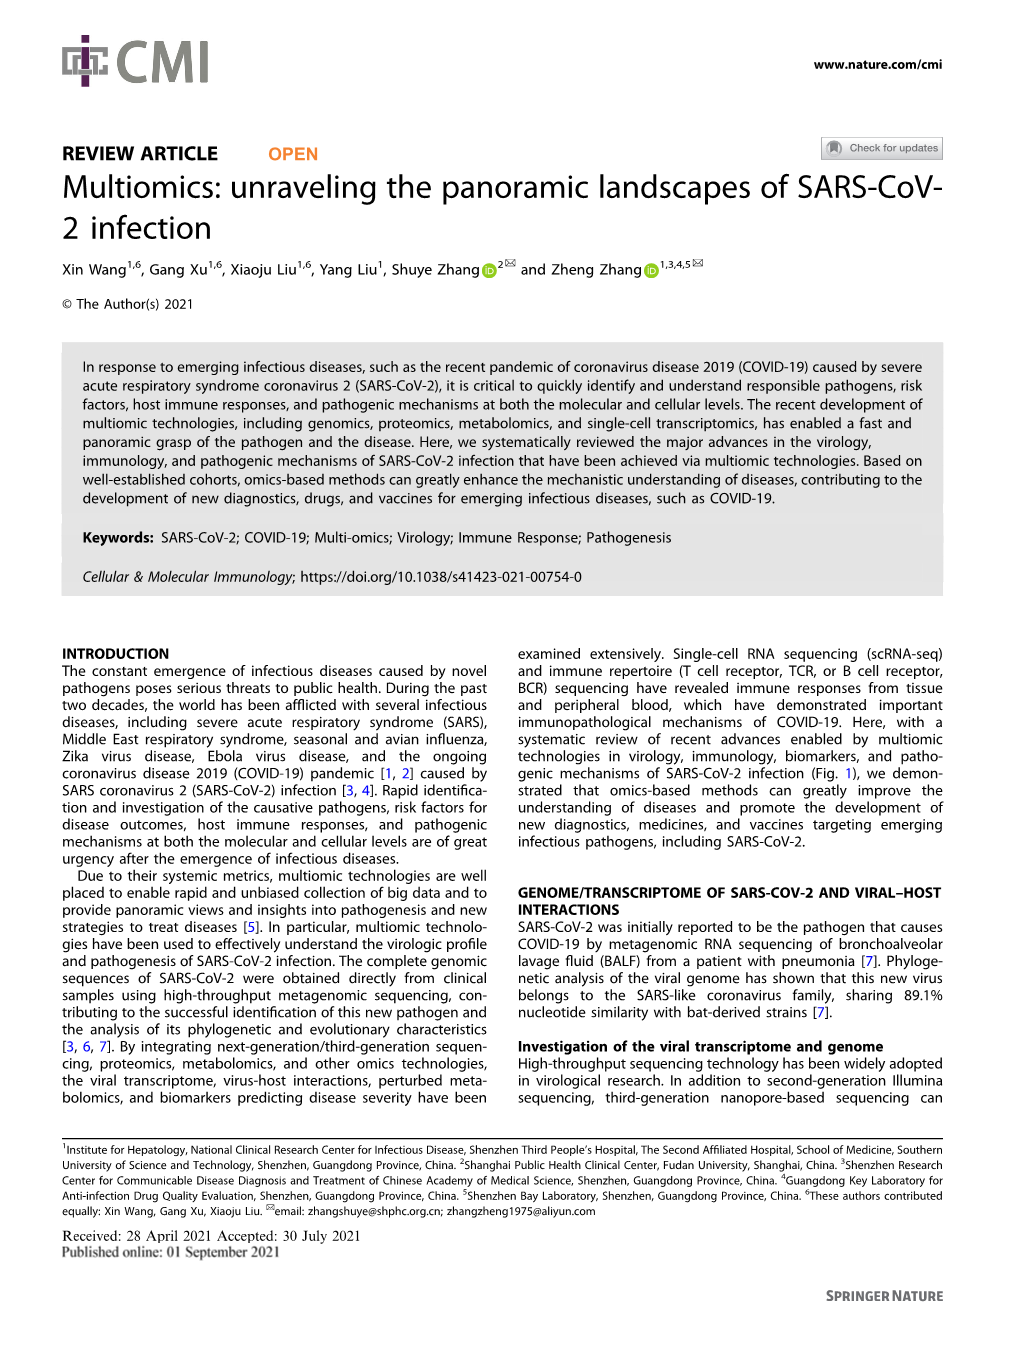 Multiomics: Unraveling the Panoramic Landscapes of SARS-Cov-2 Infection